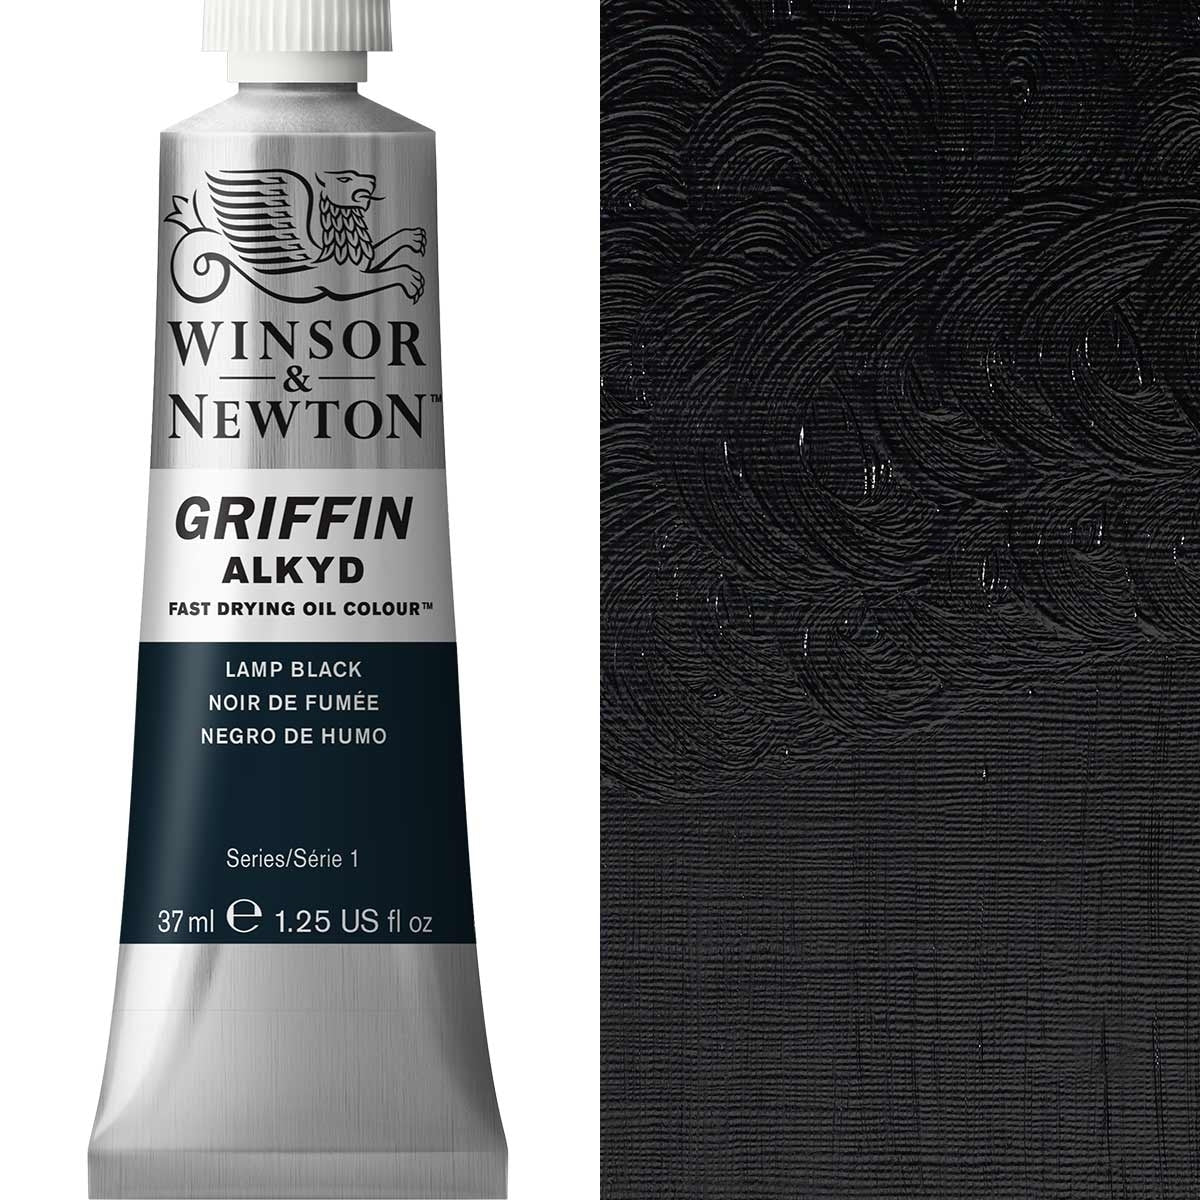 Winsor and Newton - Griffin ALKYD Oil Colour - 37ml - Lamp Black